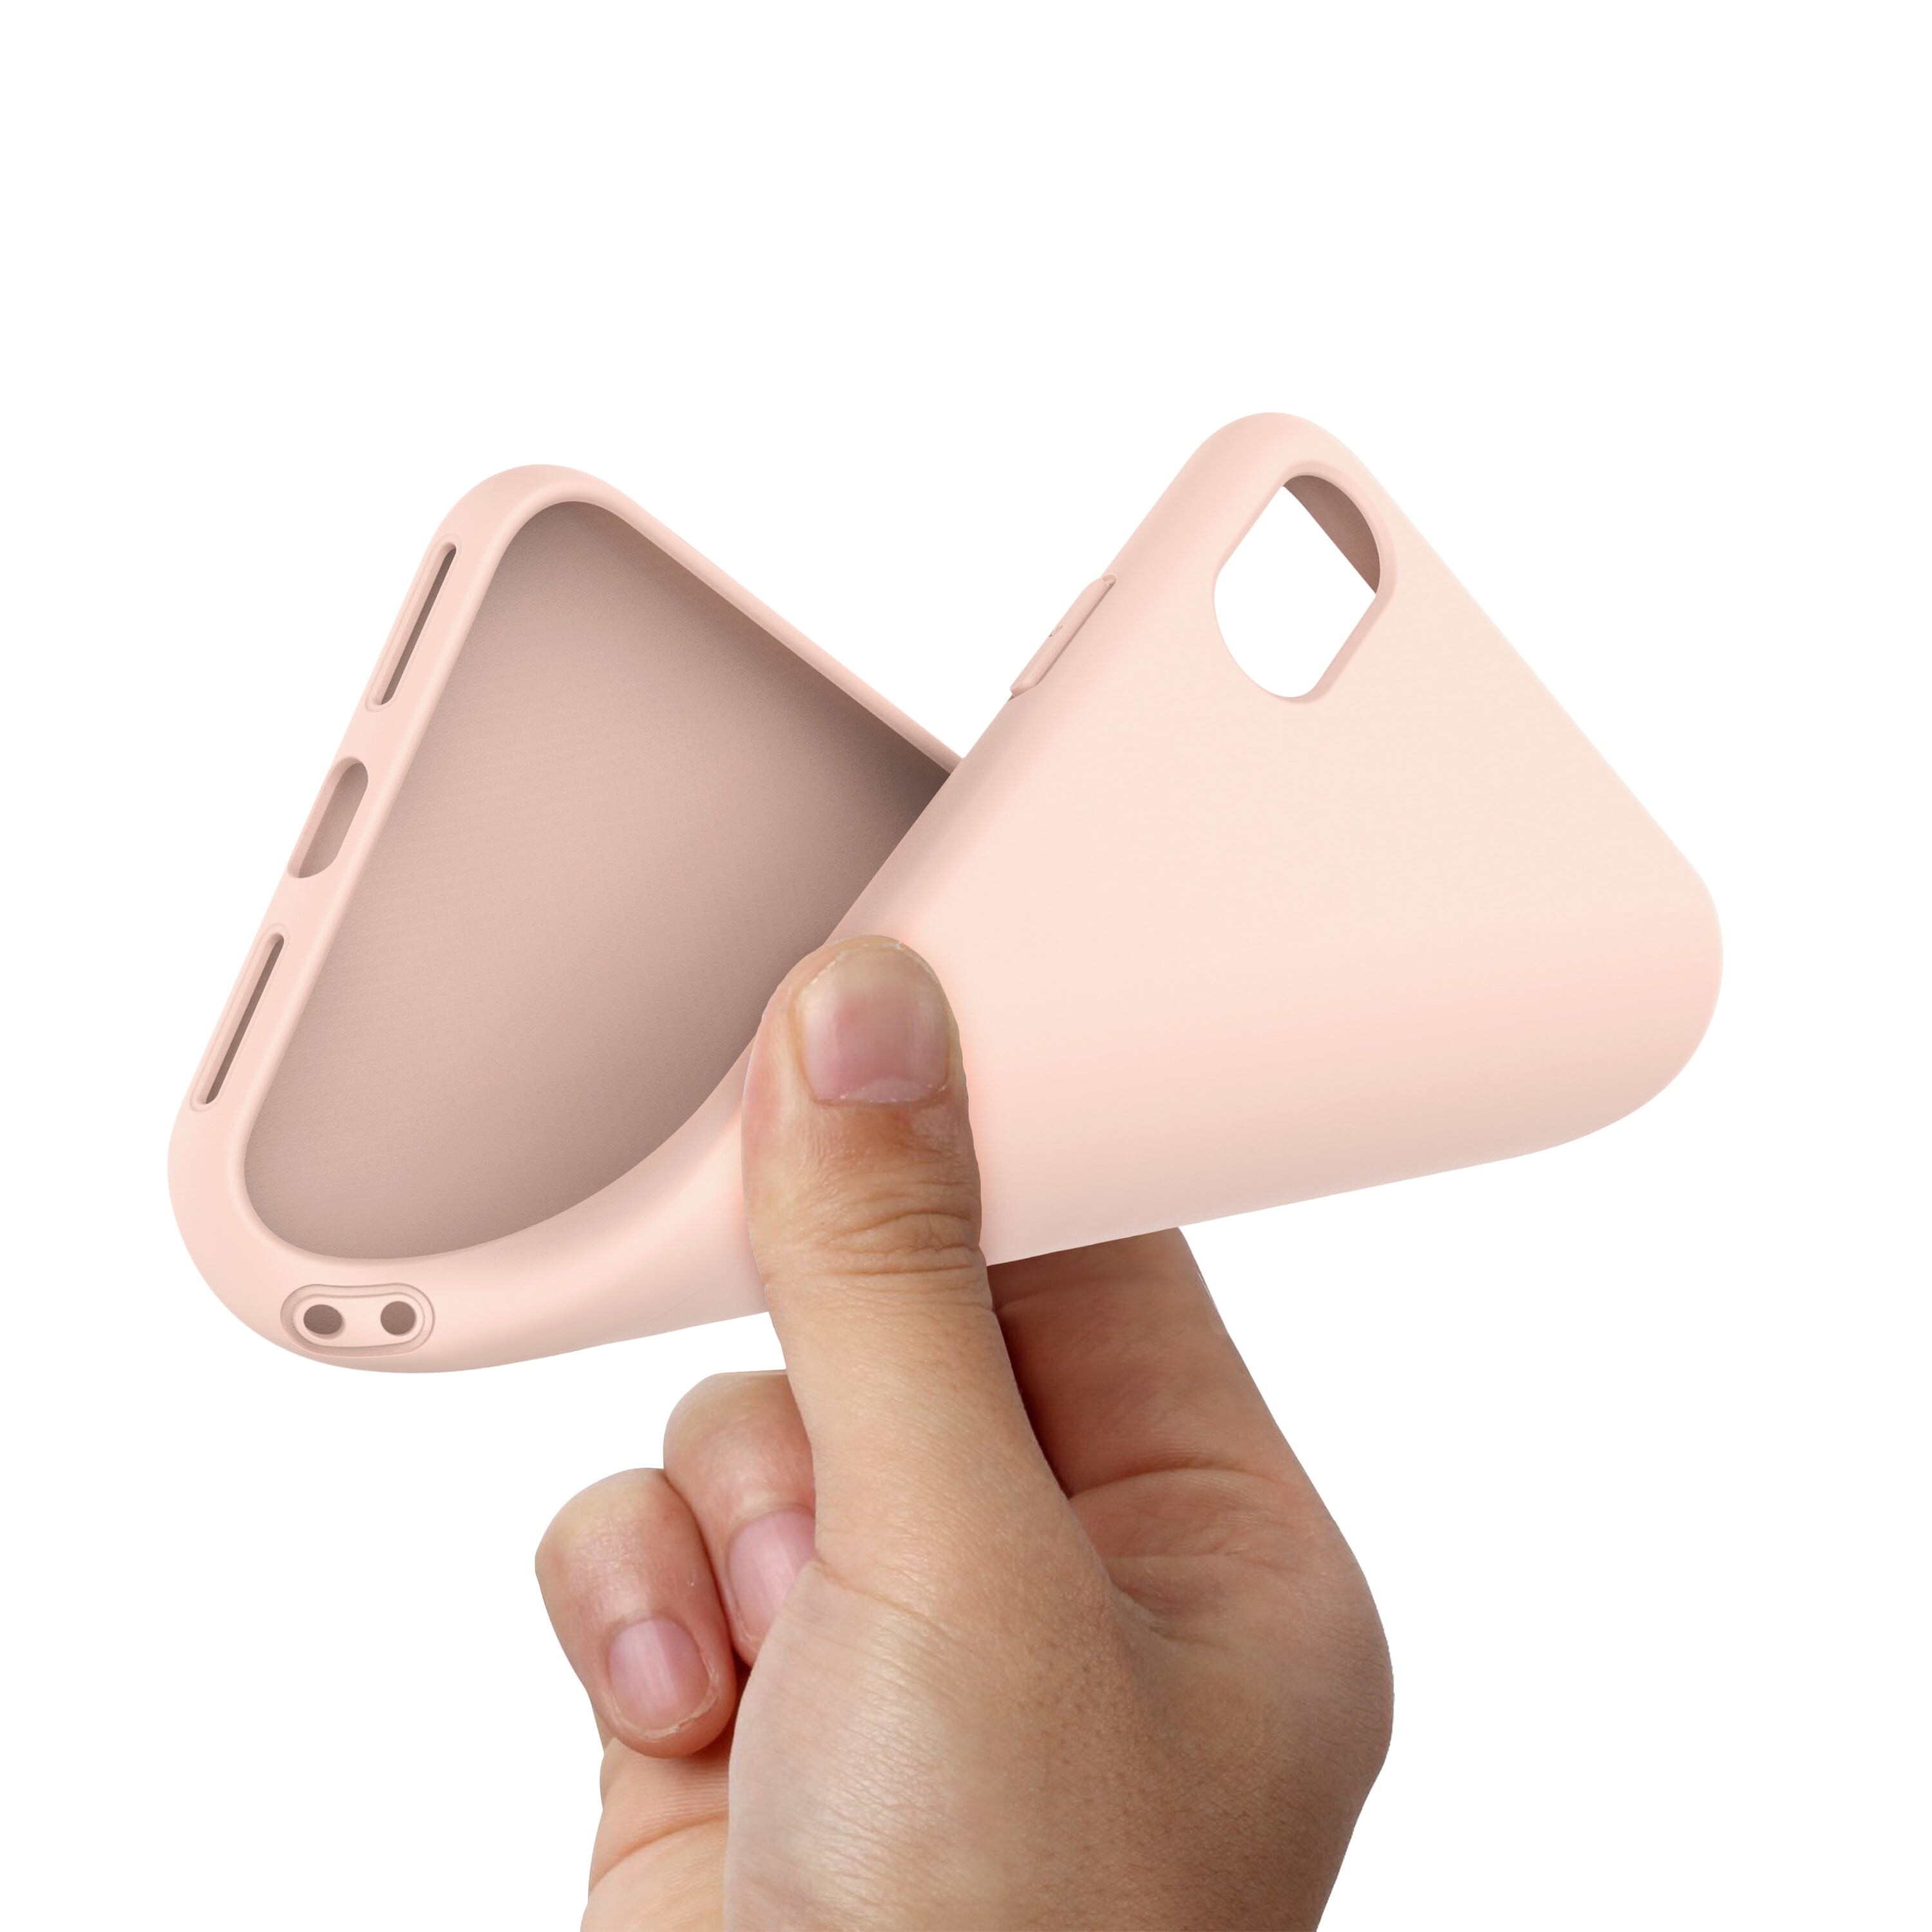 Njjex Case Cover for Apple iPhone XR / iPhone XS Max / iPhone XS / iPhone X  / iPhone 10 / iPhone X Edition, Njjex Matte Charming Colorful Slim Soft